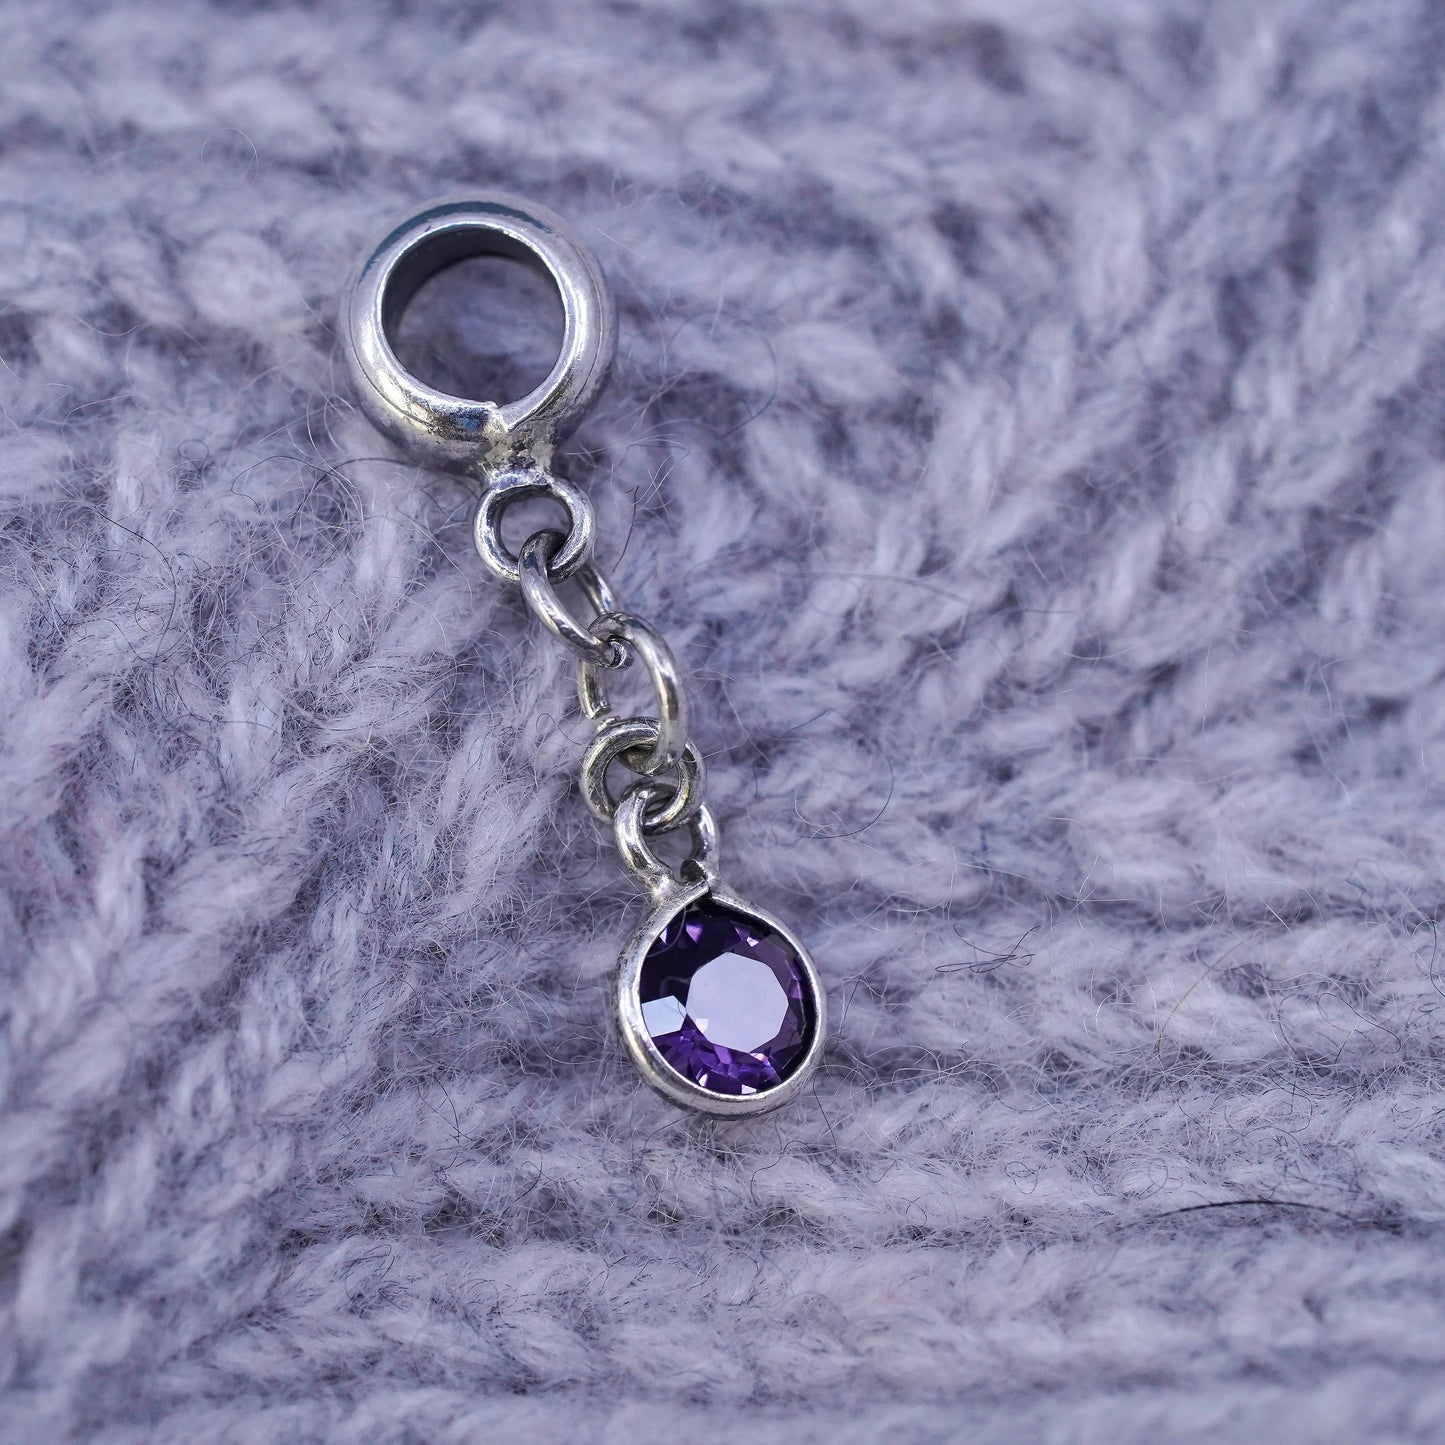 Vintage Sterling 925 silver handmade charm pendant with amethyst